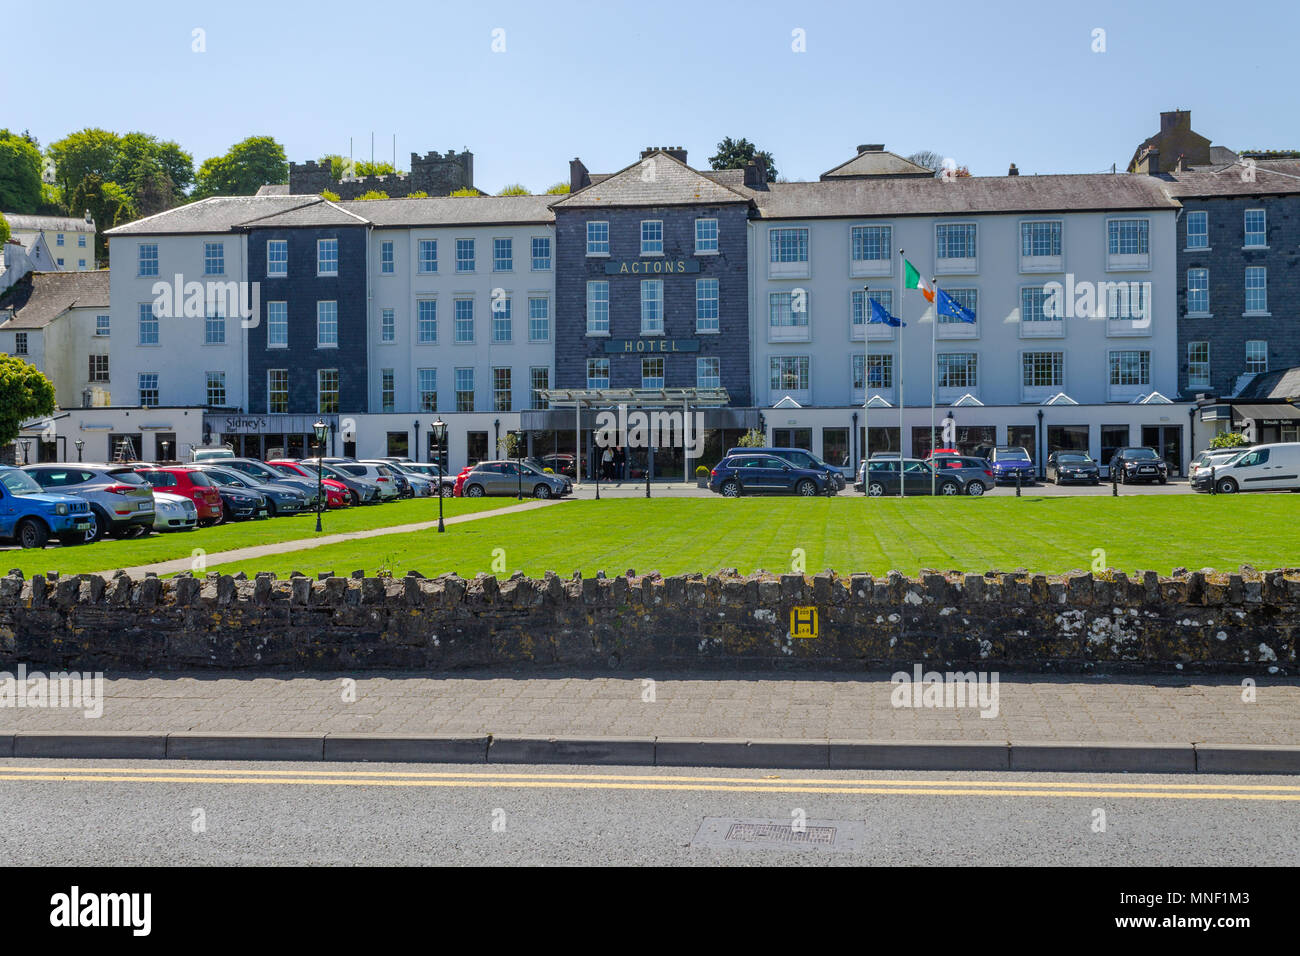 Actons hotel in kinsale ireland, with a full carpark and flags flying in the summer breeze. Kinsale is a popular seaside holiday resort town. Stock Photo